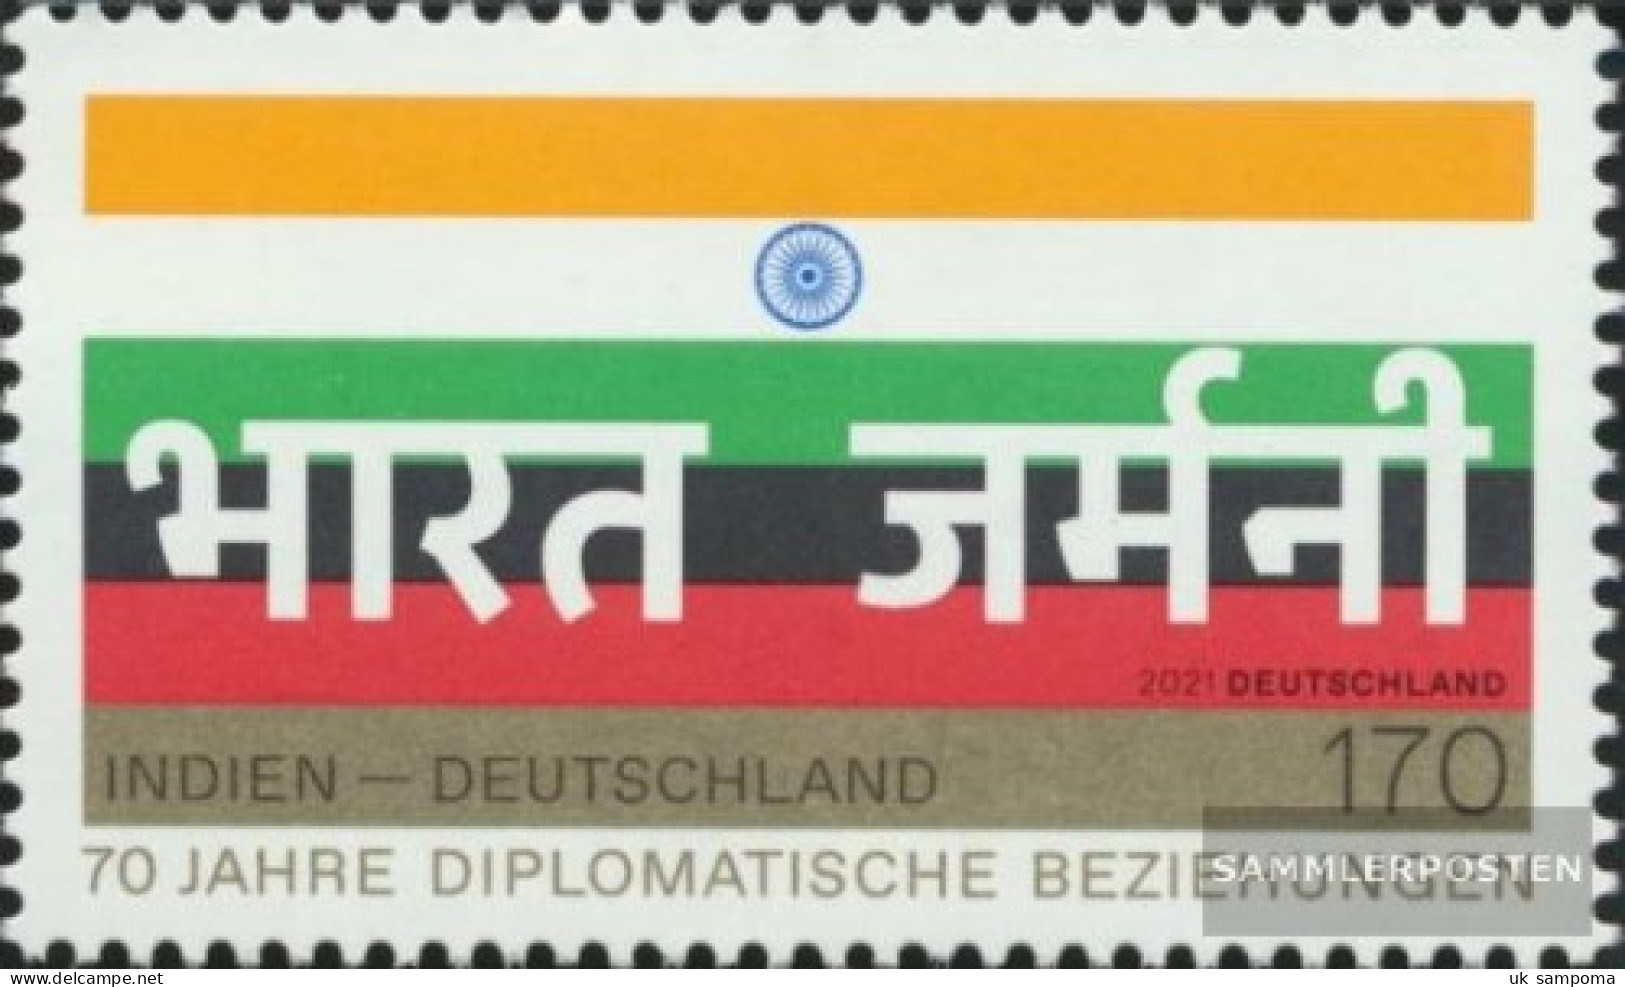 FRD (FR.Germany) 3612 (complete Issue) Unmounted Mint / Never Hinged 2021 Diplomacy With India - Neufs